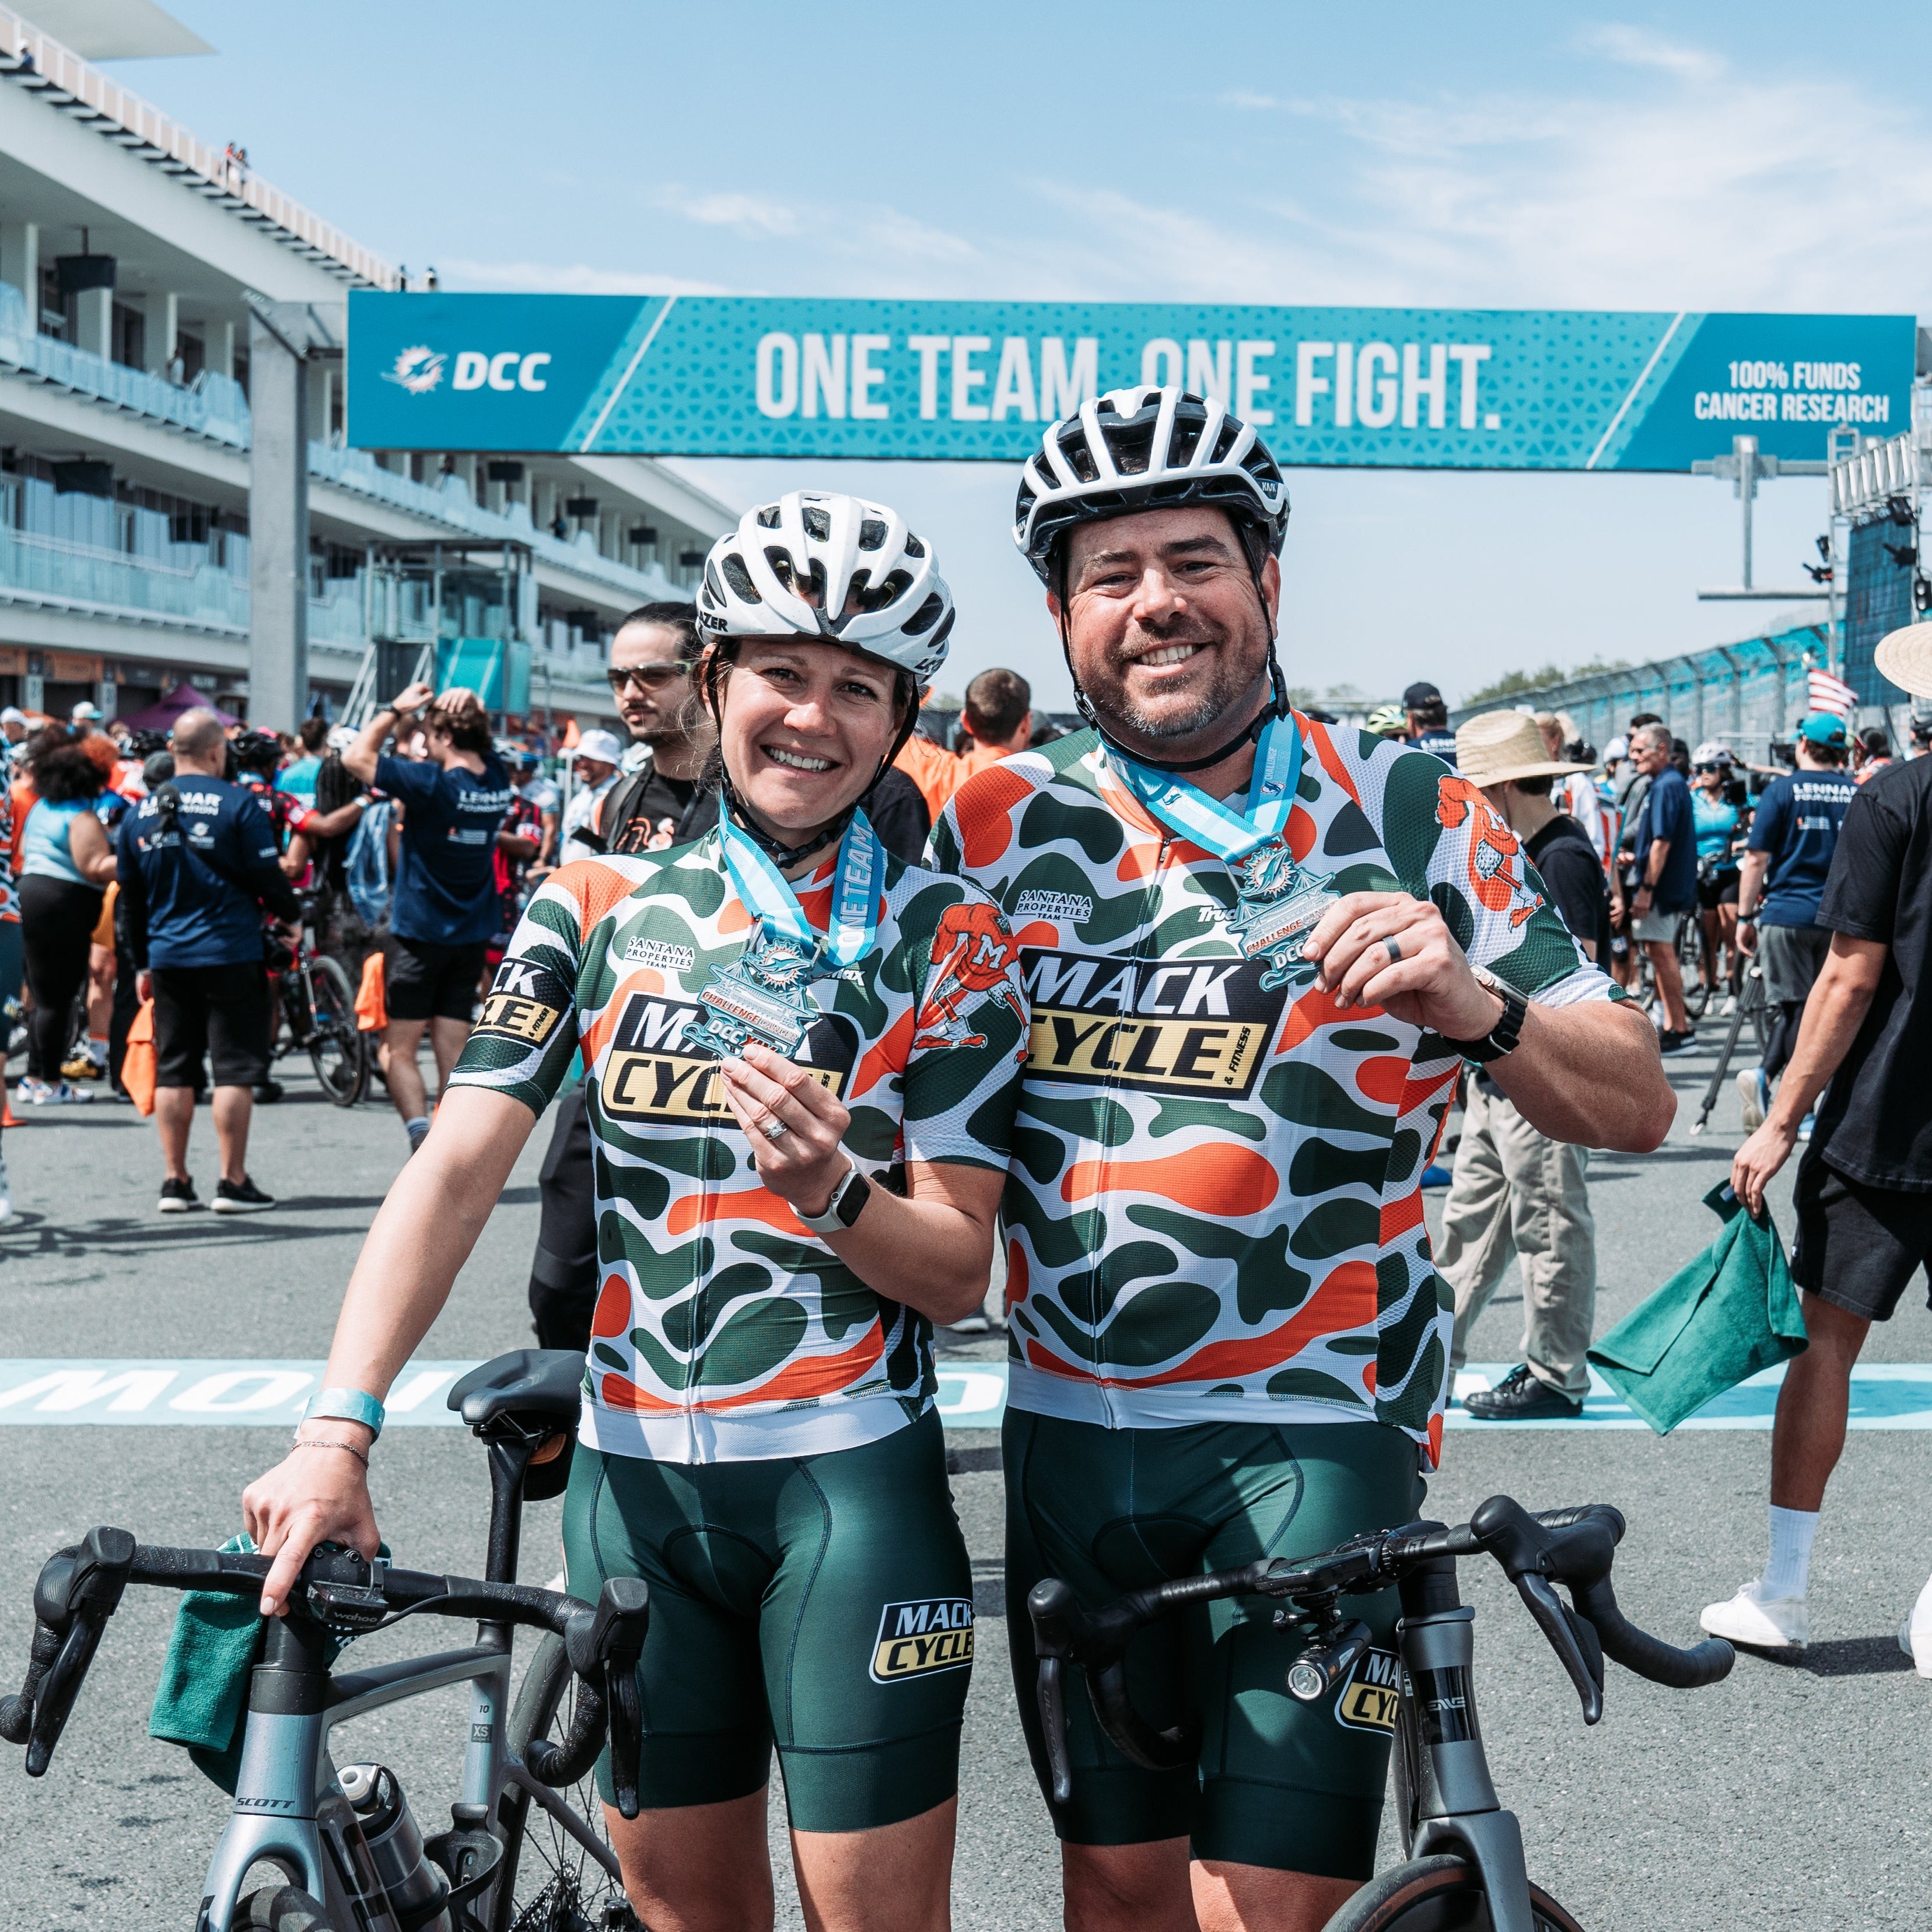 Shaun and Tennille Moore at the finish line after the DCXIV. Shaun Finished his 14th DCC 99 mile with Team Hurricanes Mack Cycle in a full Grand Prix Miami Style Race Track Experience